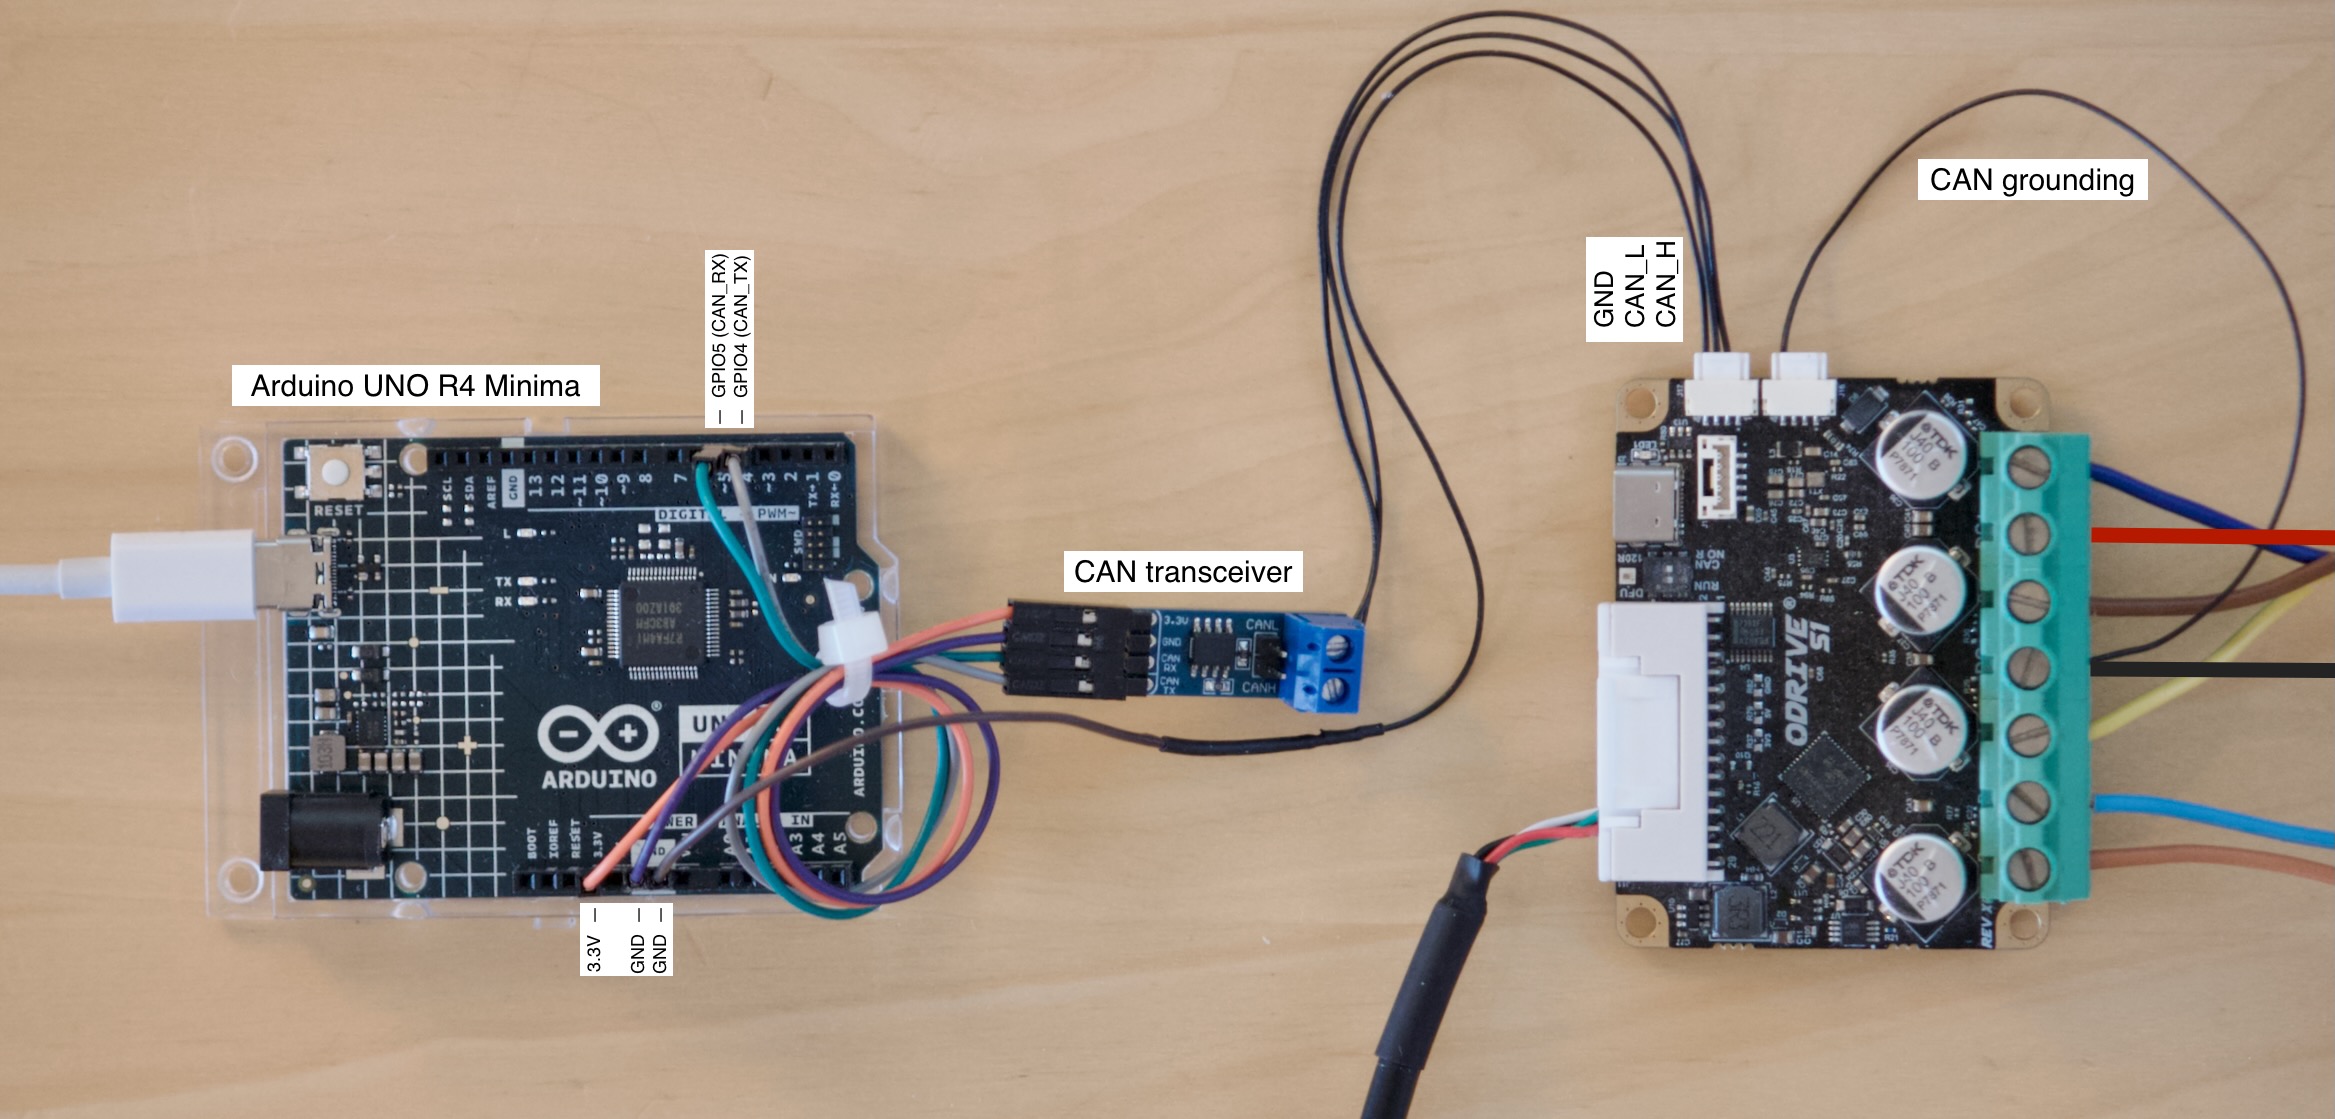 Arduino connected to ODrive S1 via CAN